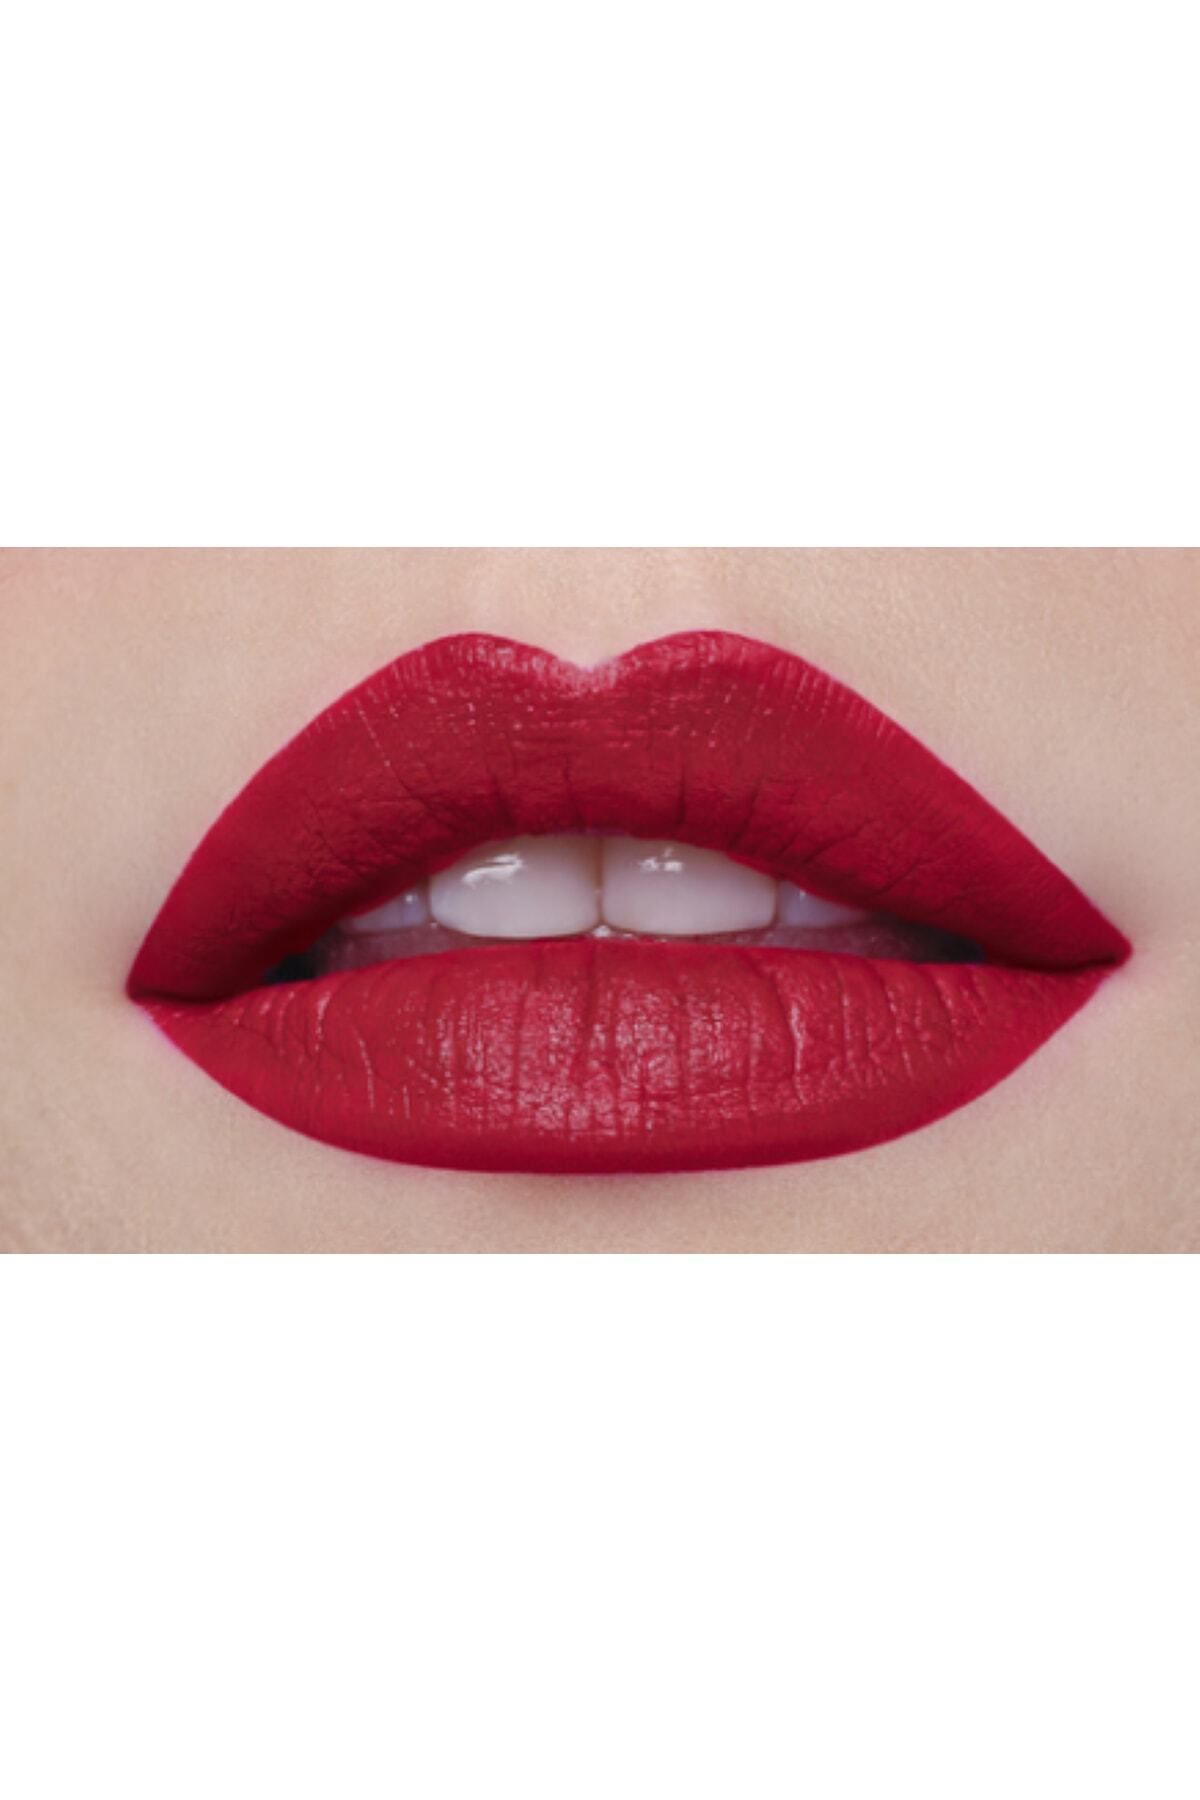 Faberlic Hd Color Lipstick, Shade Red Memoirs